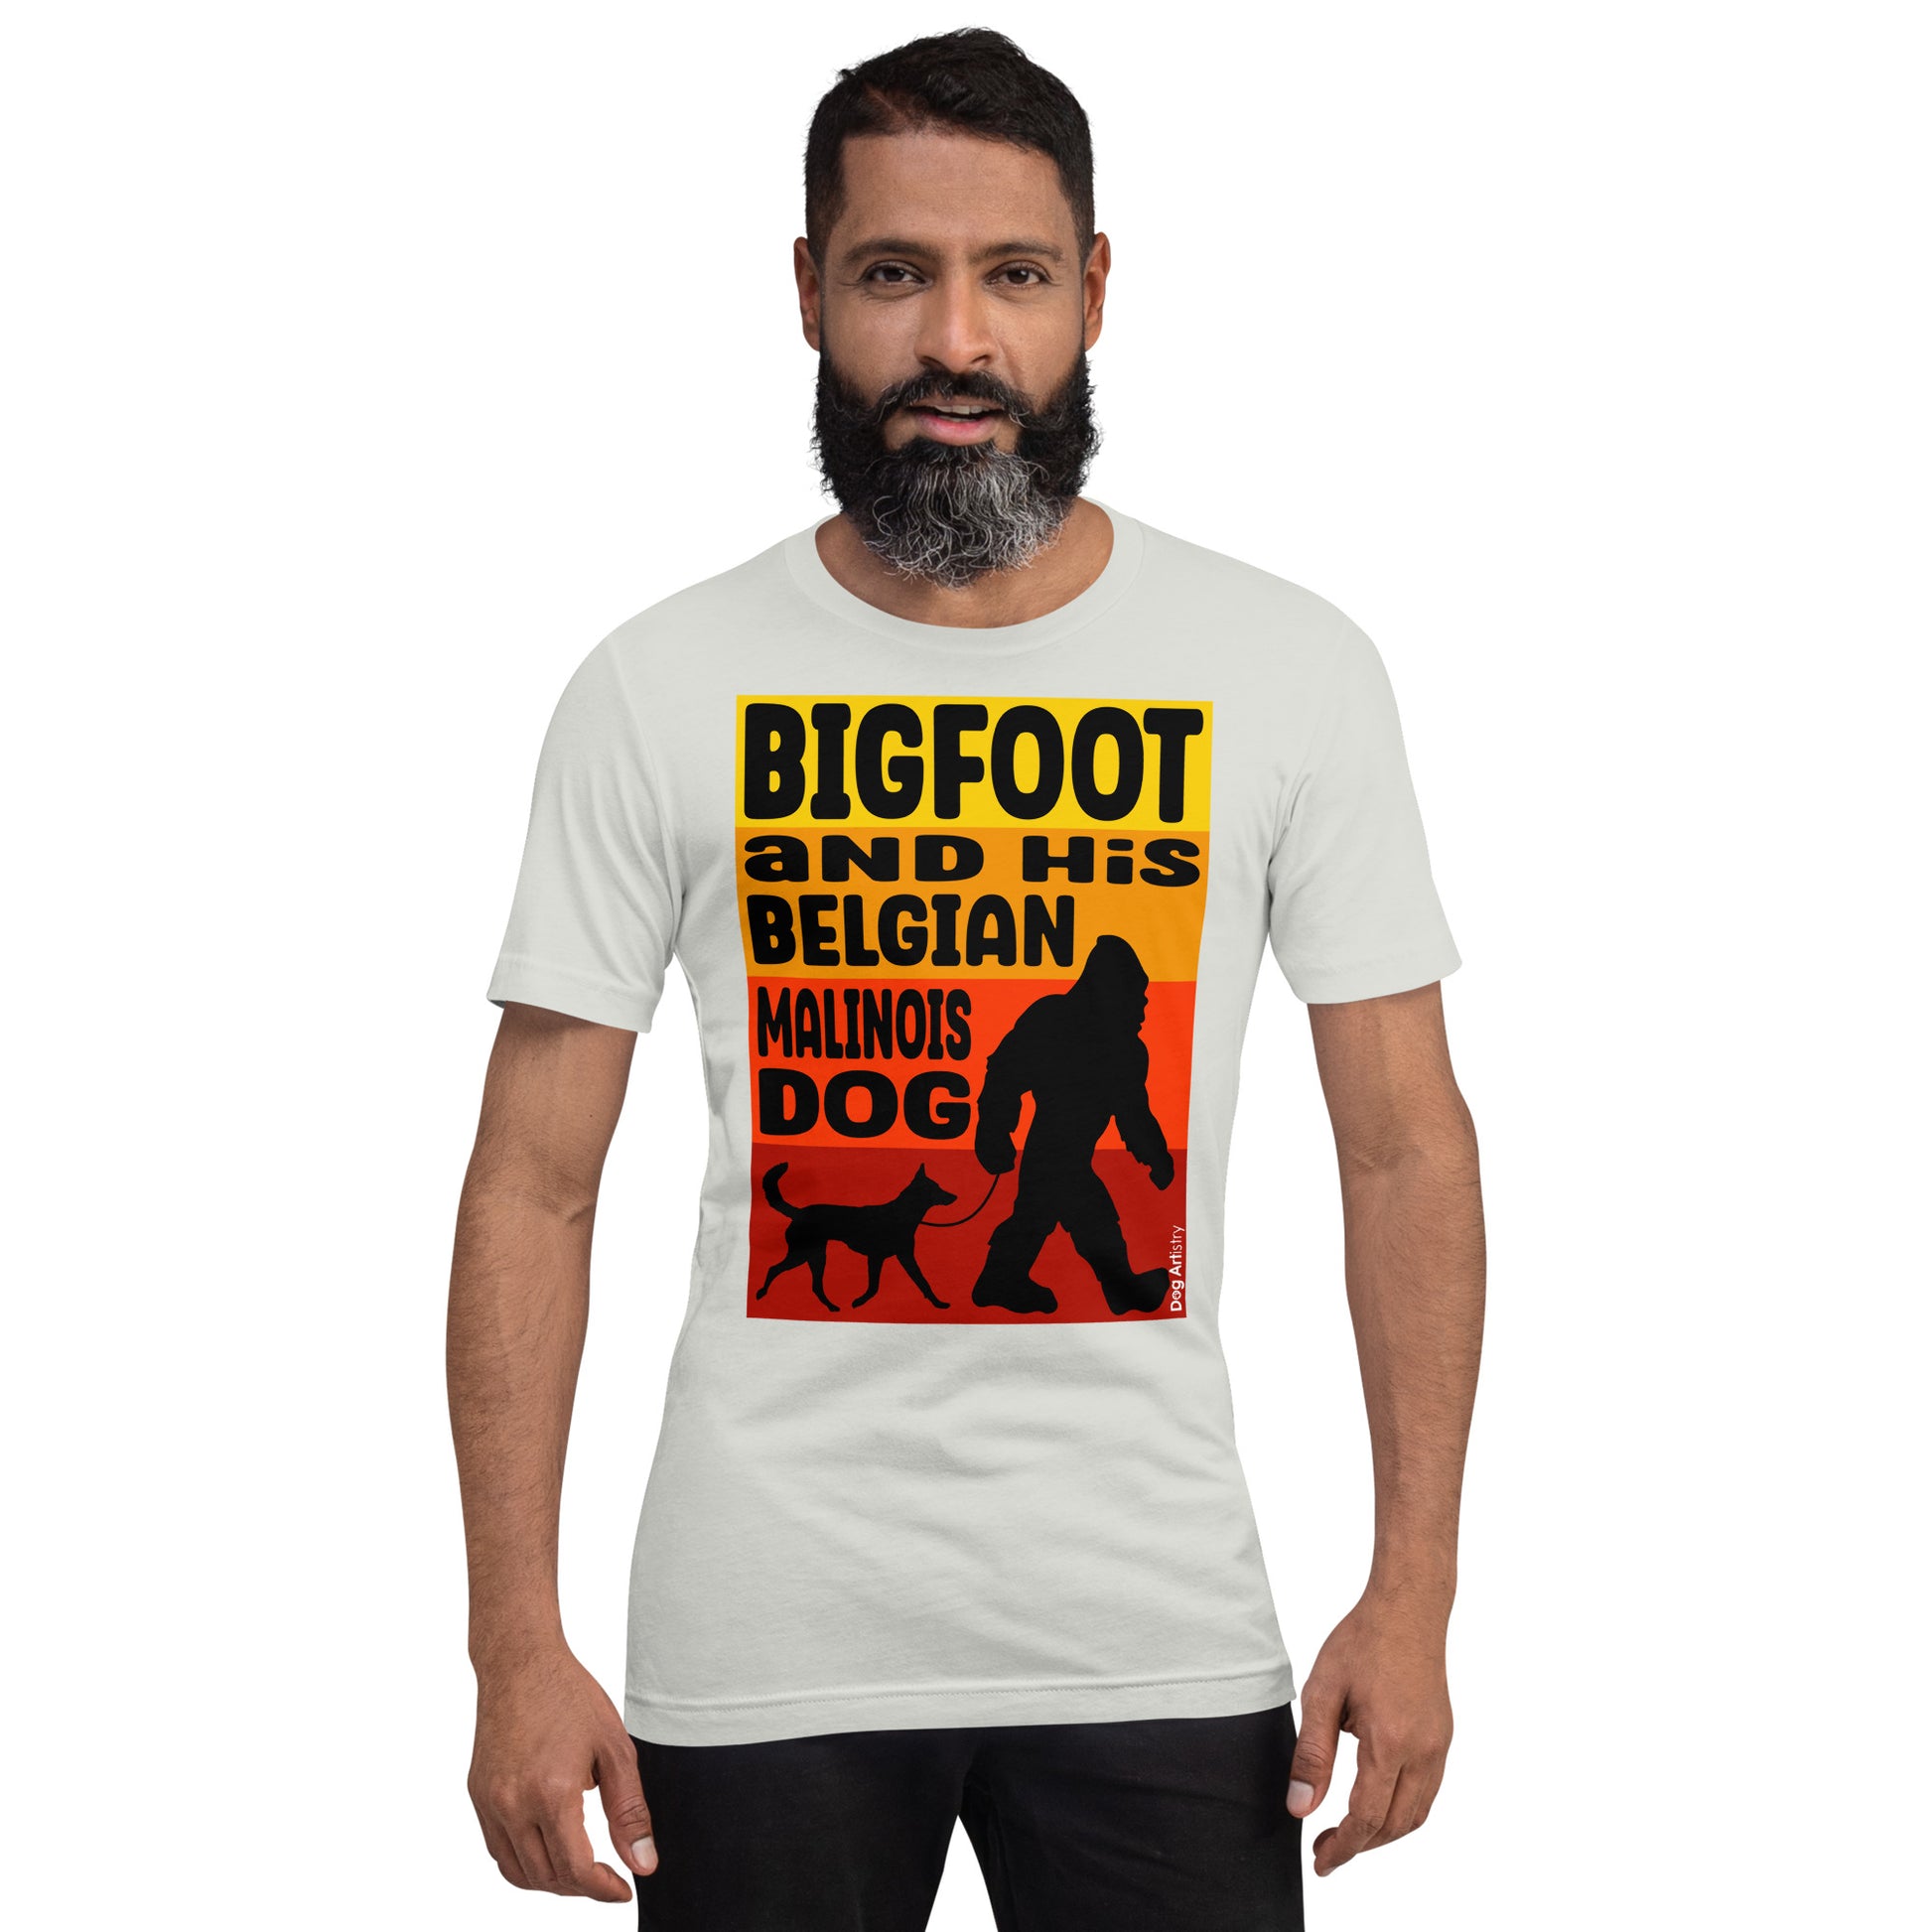 Big foot and his Belgian Malinois unisex silver t-shirt by Dog Artistry.